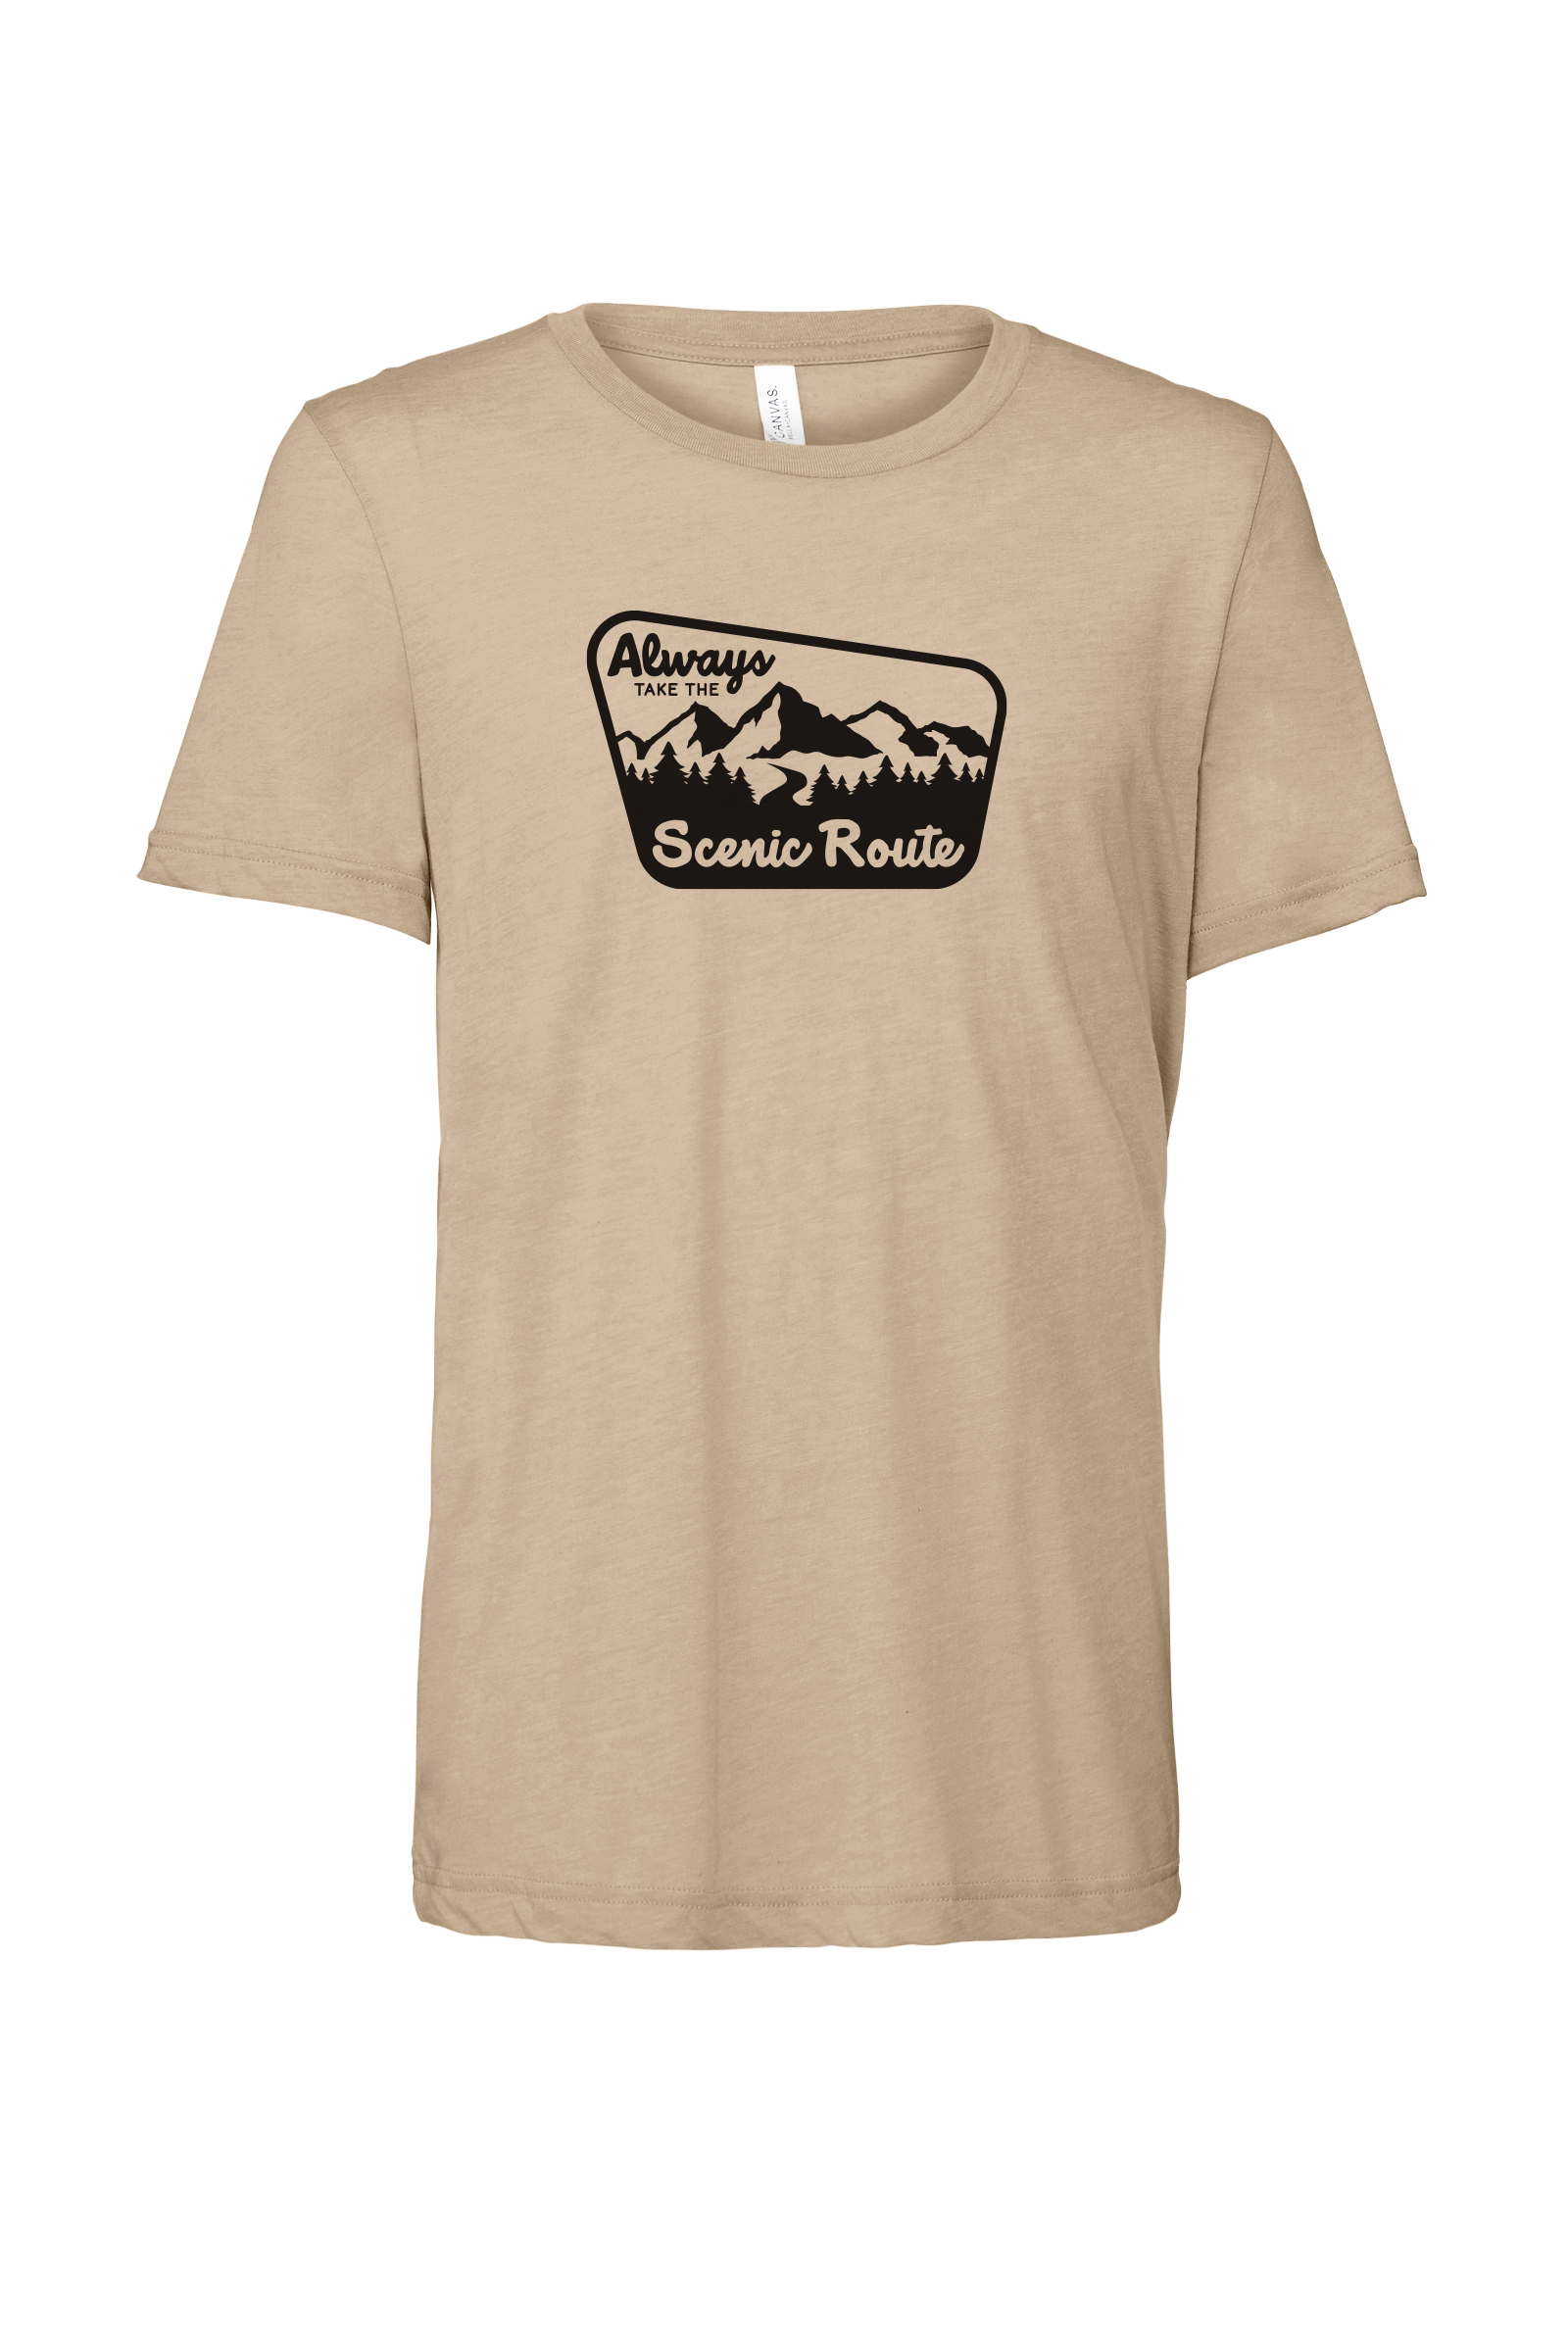 Always take the scenic route outdoors activity premium tee